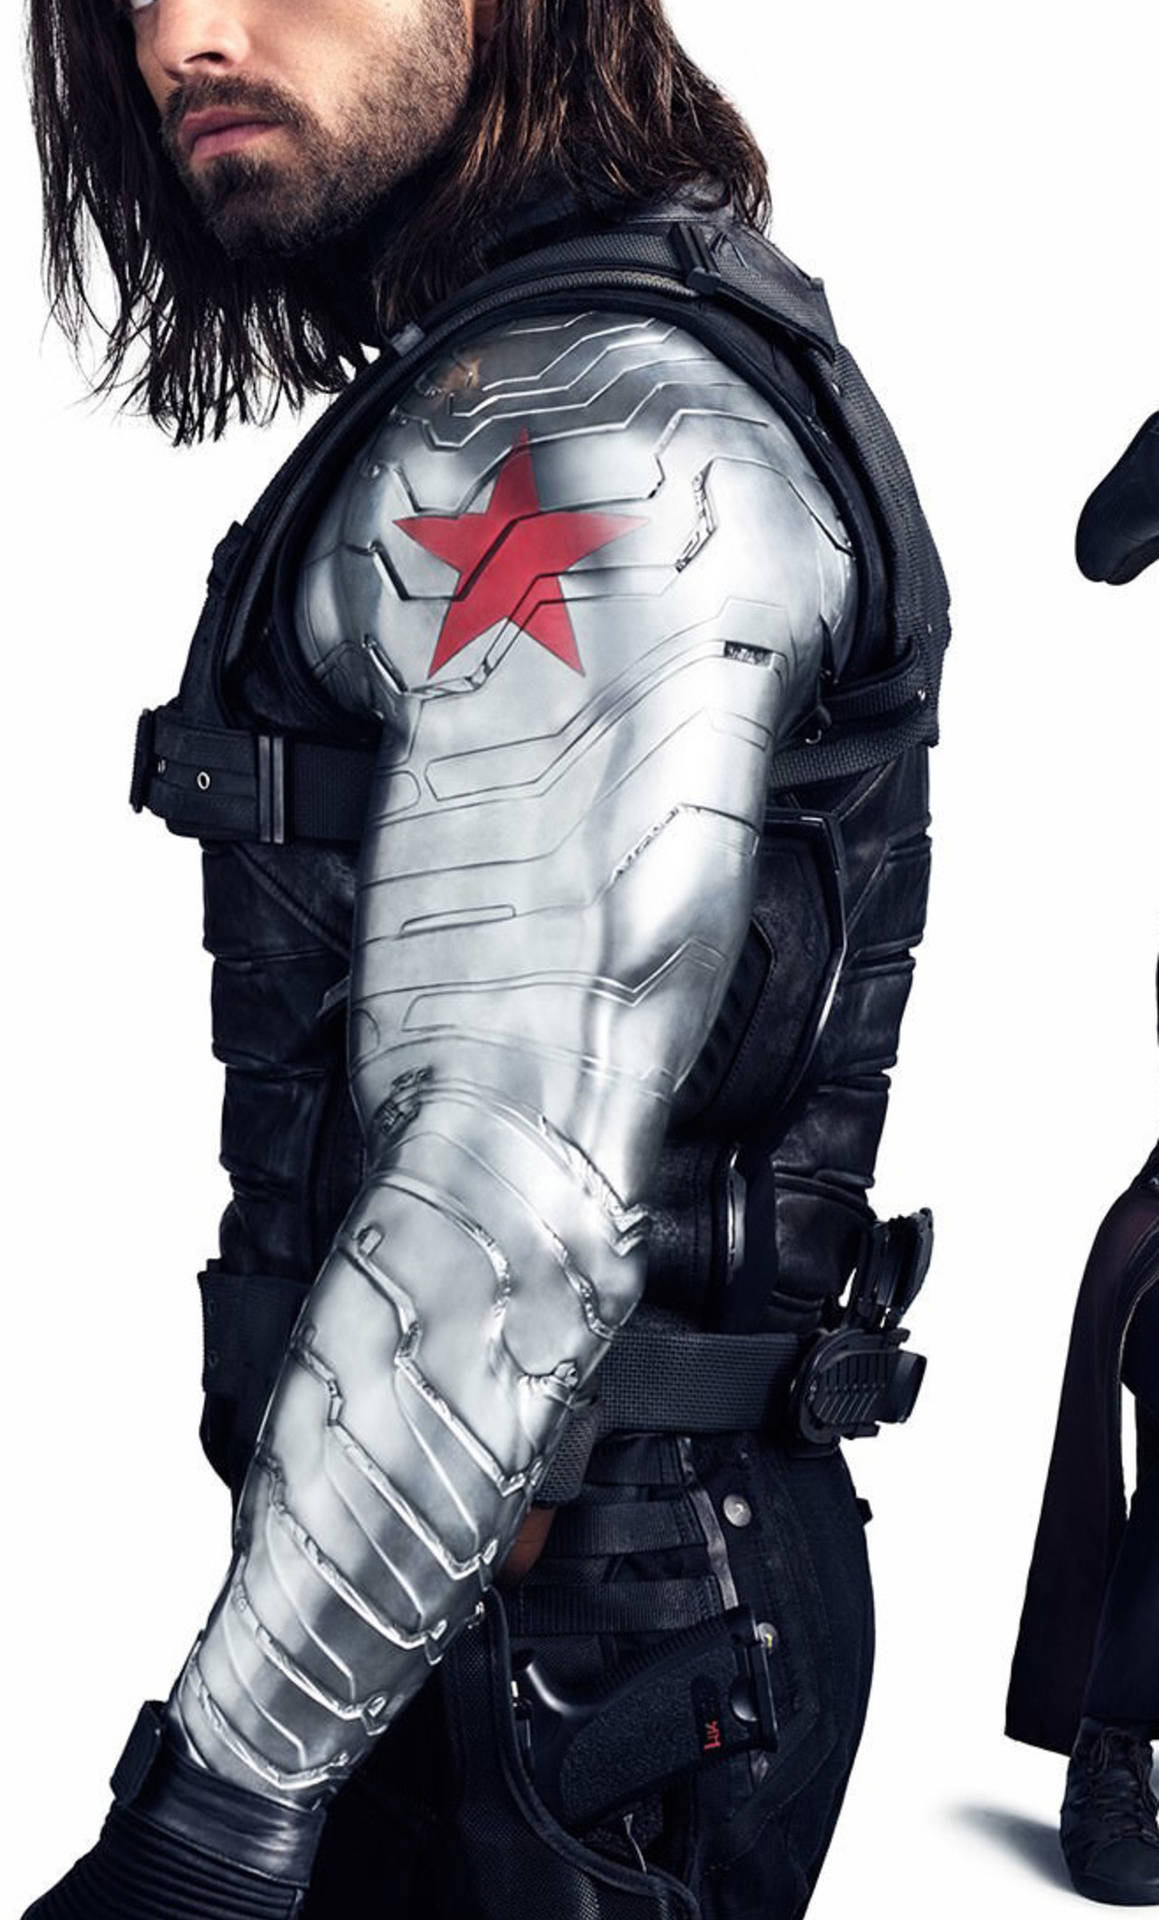 Bucky Barnes, The Avengers’ Resident Winter Soldier Background